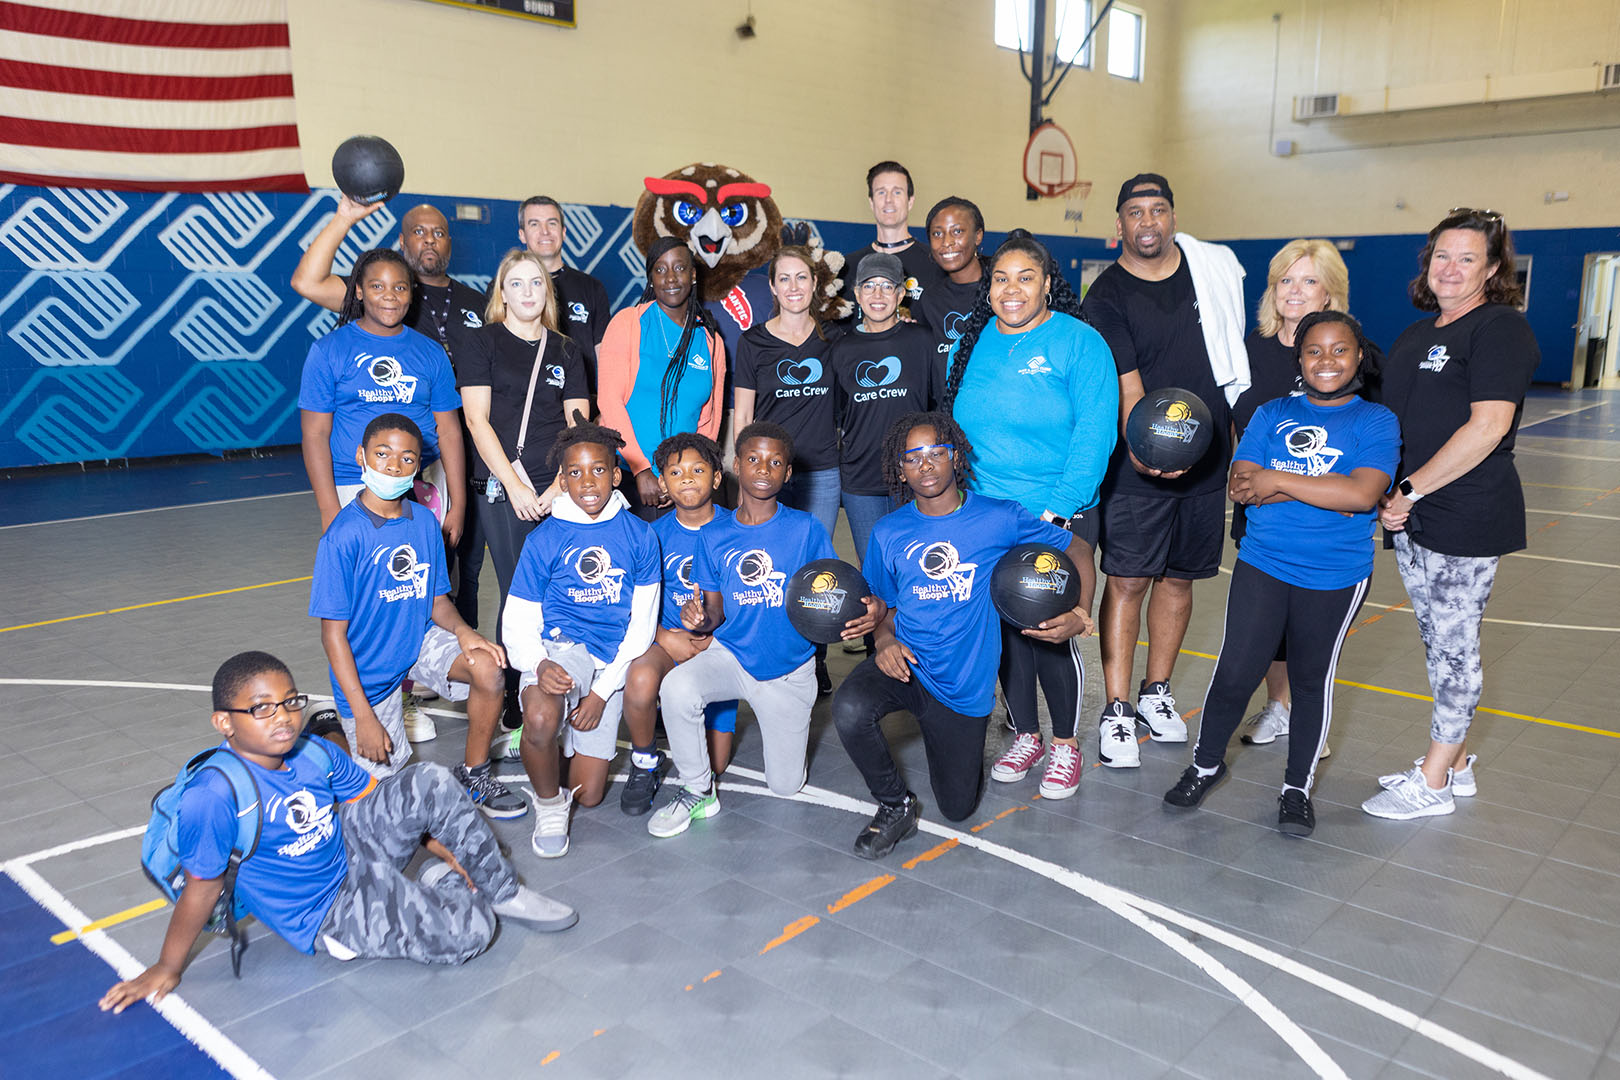 AmeriHealth Caritas Partnership staff joined volunteers from the AmeriHealth Caritas Florida Care Crew and the community to hold five Healthy Hoops events in Palm Beach County, including this one at Delray Beach Boys & Girls Club on June 13.